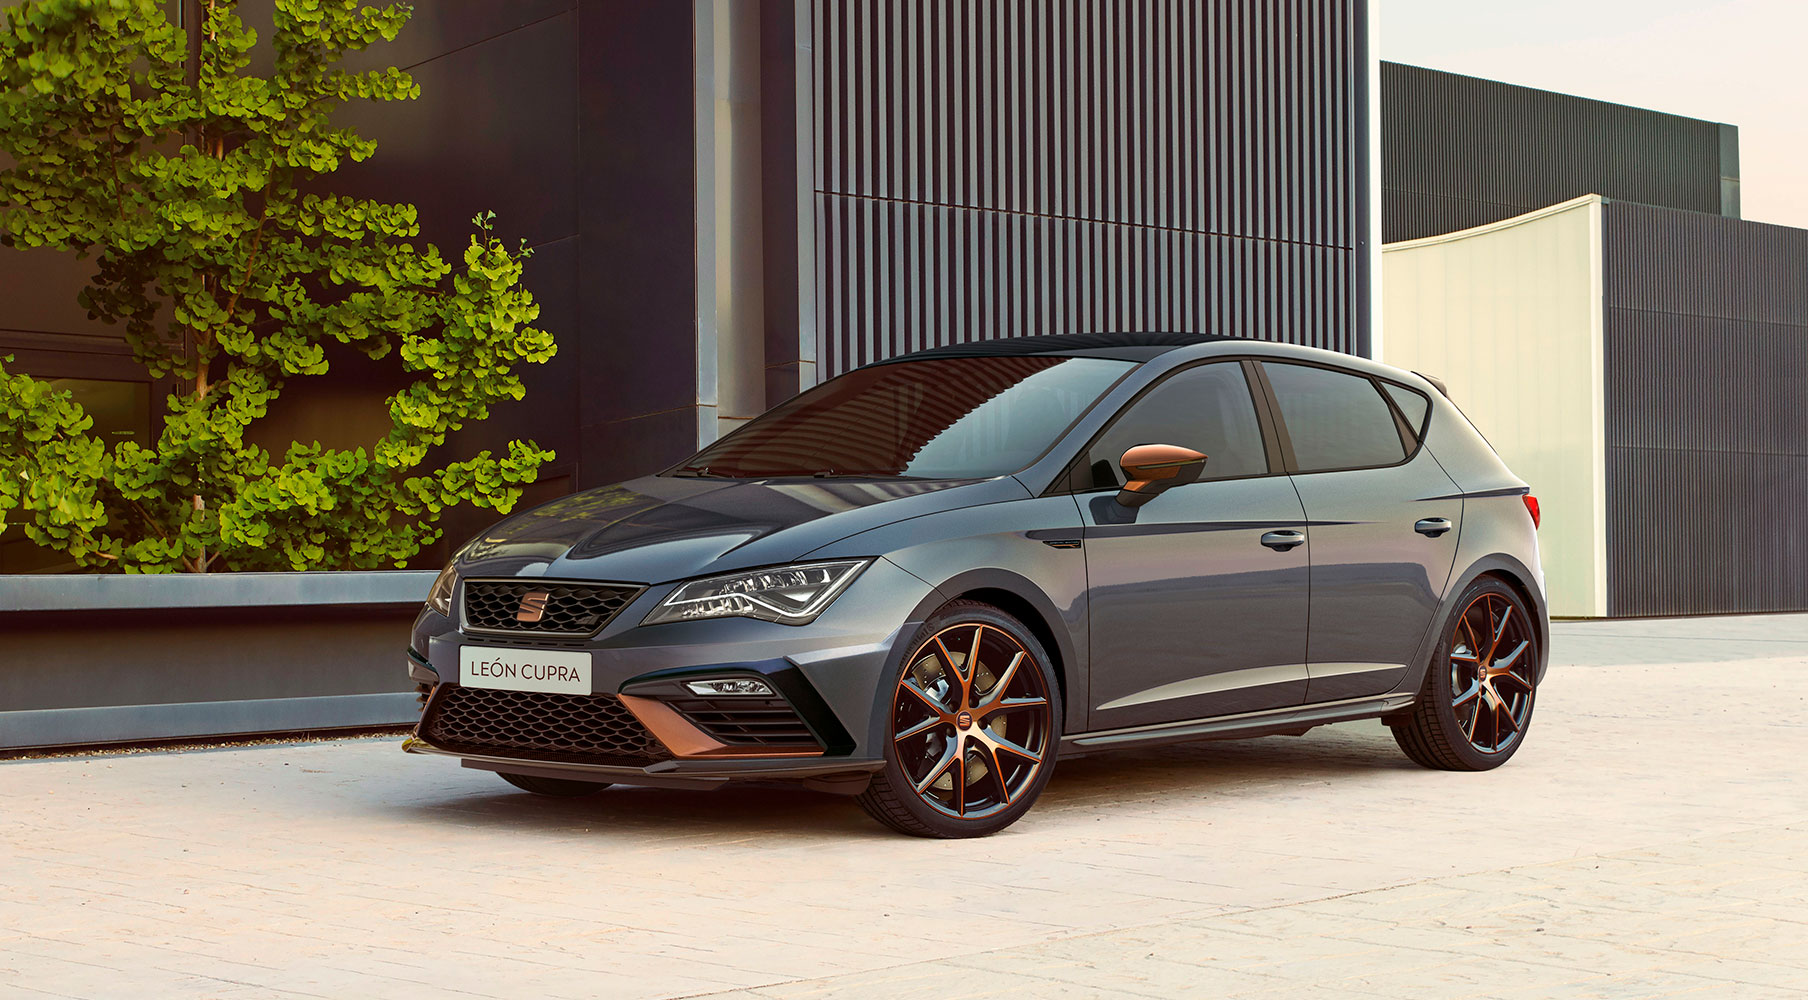 https://www.seat.mx/content/dam/countries/mx/seat-website/company/news-and-events/cars/seat-leon-special-edition/single-image/SEAT-Leon-CUPRA-Special-Edition-1.jpg